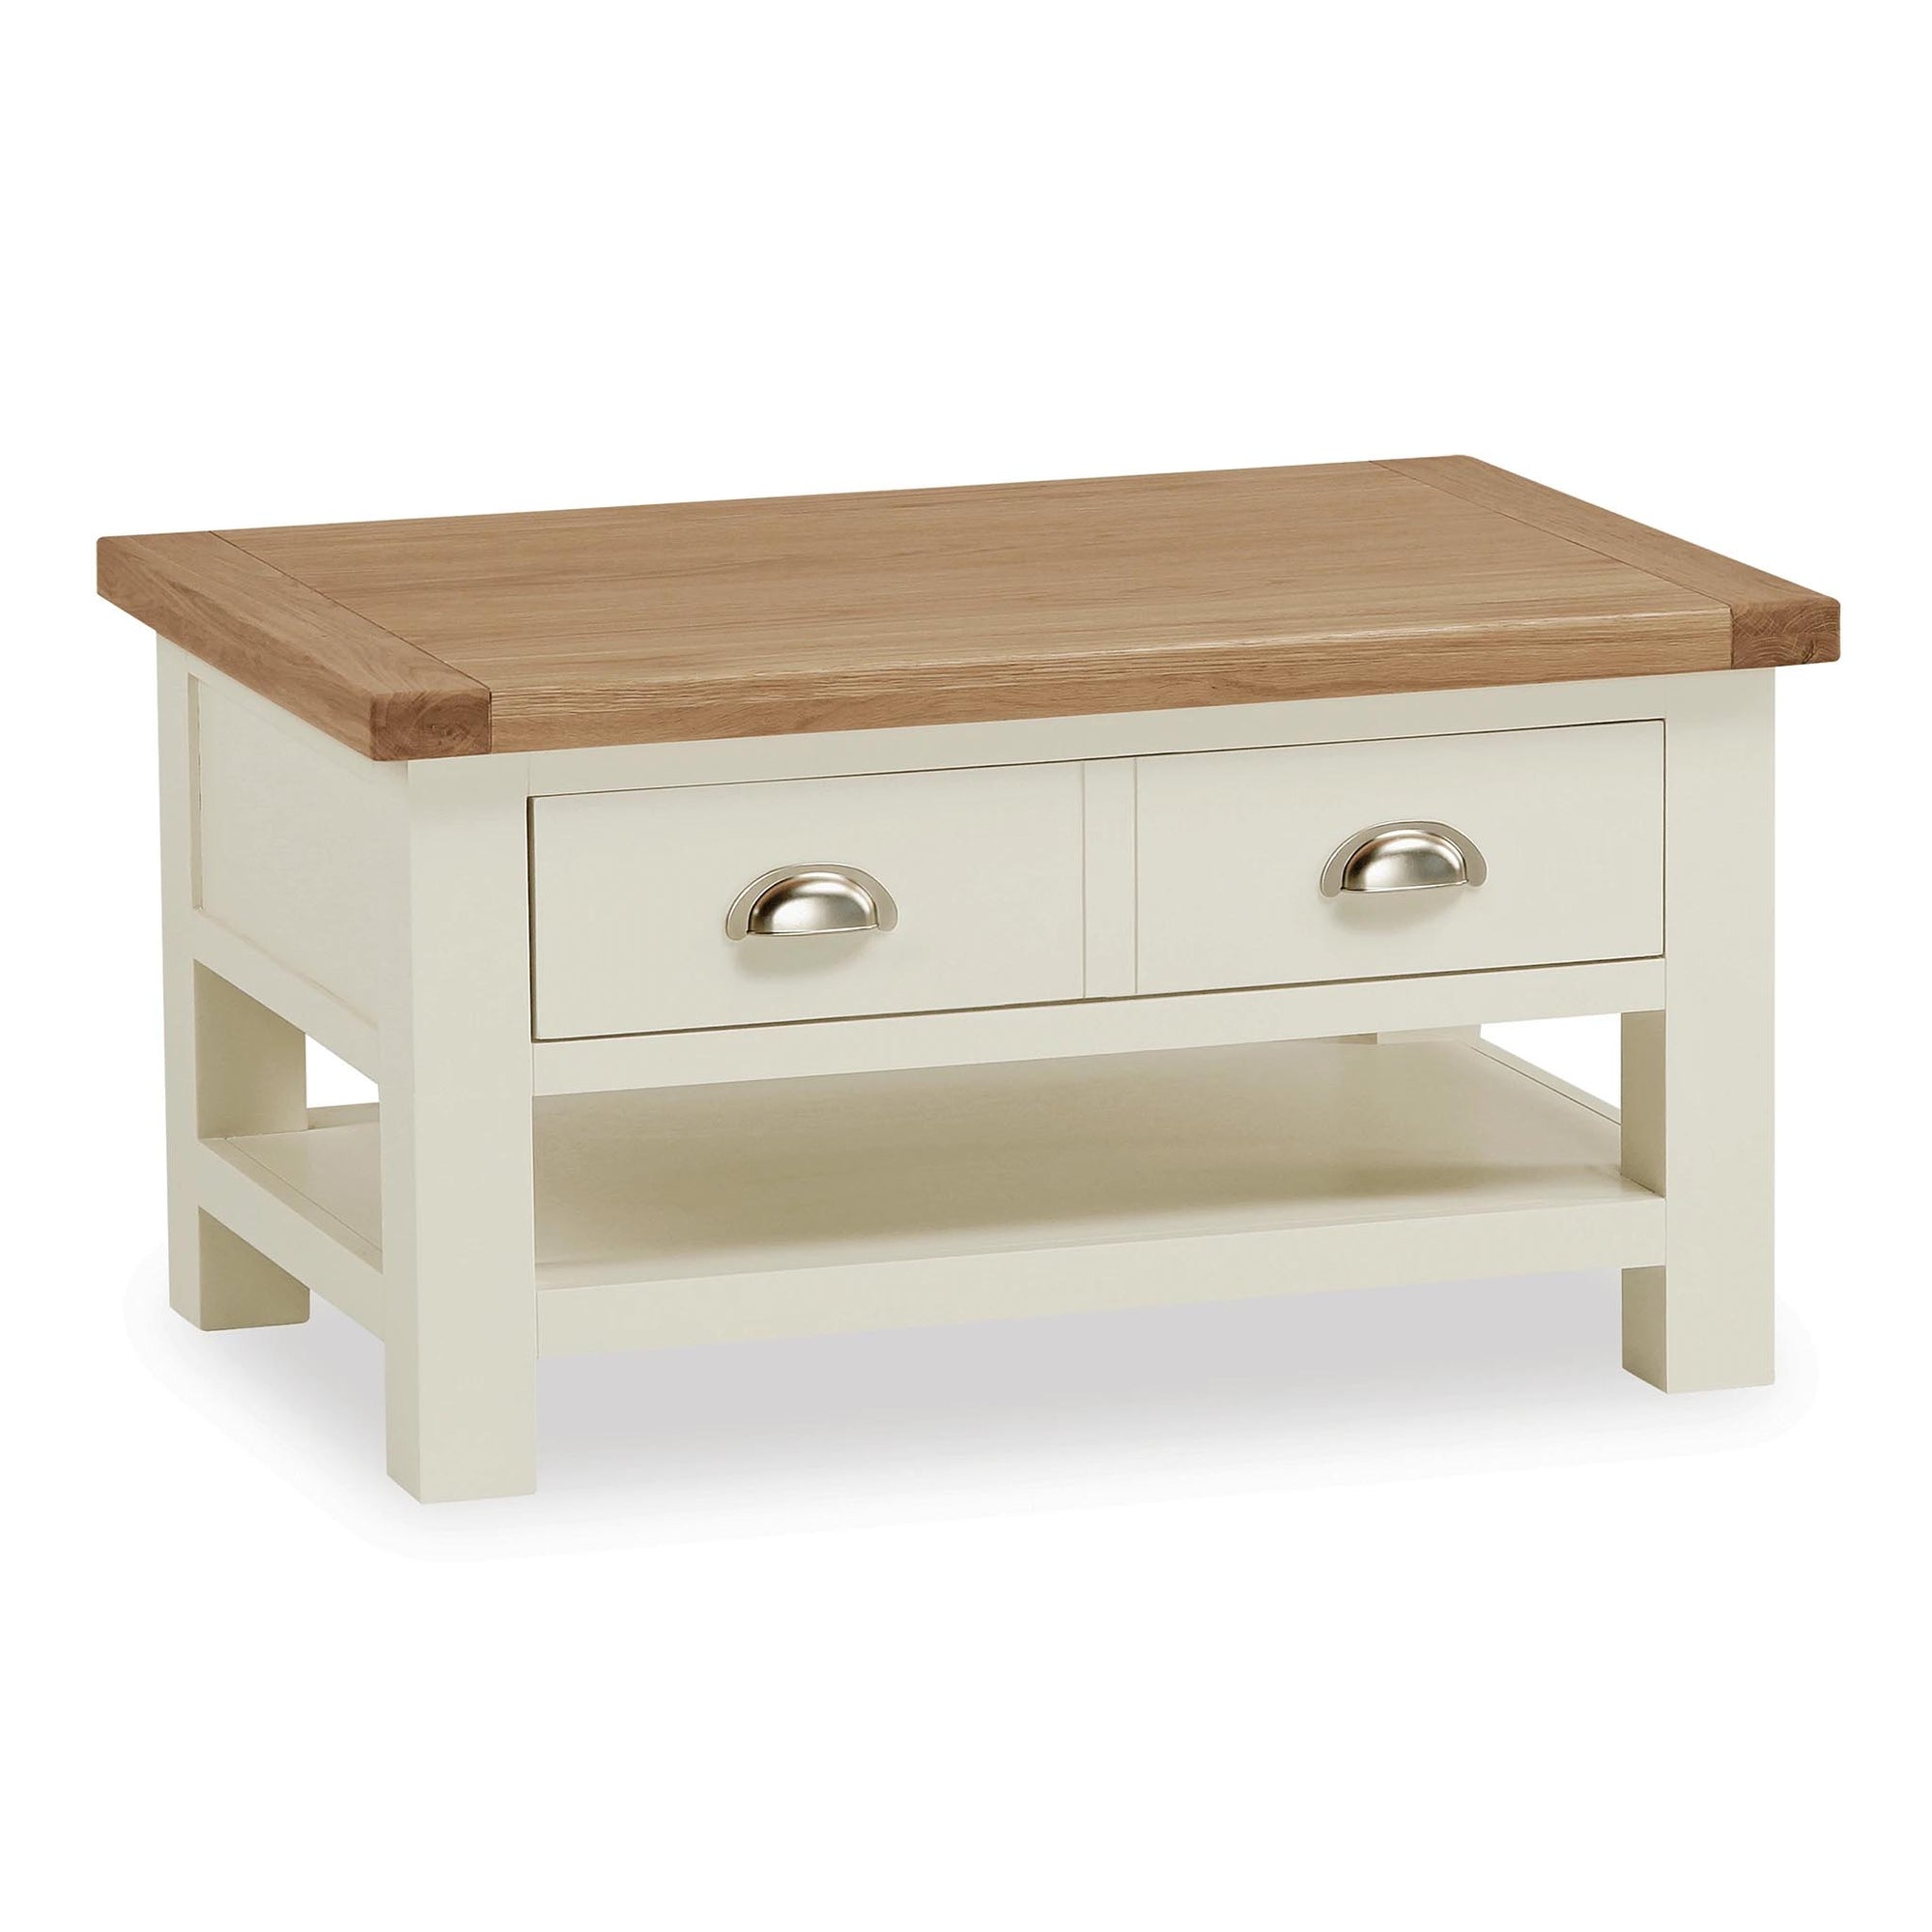 Daymer Cream Painted Small Coffee Table